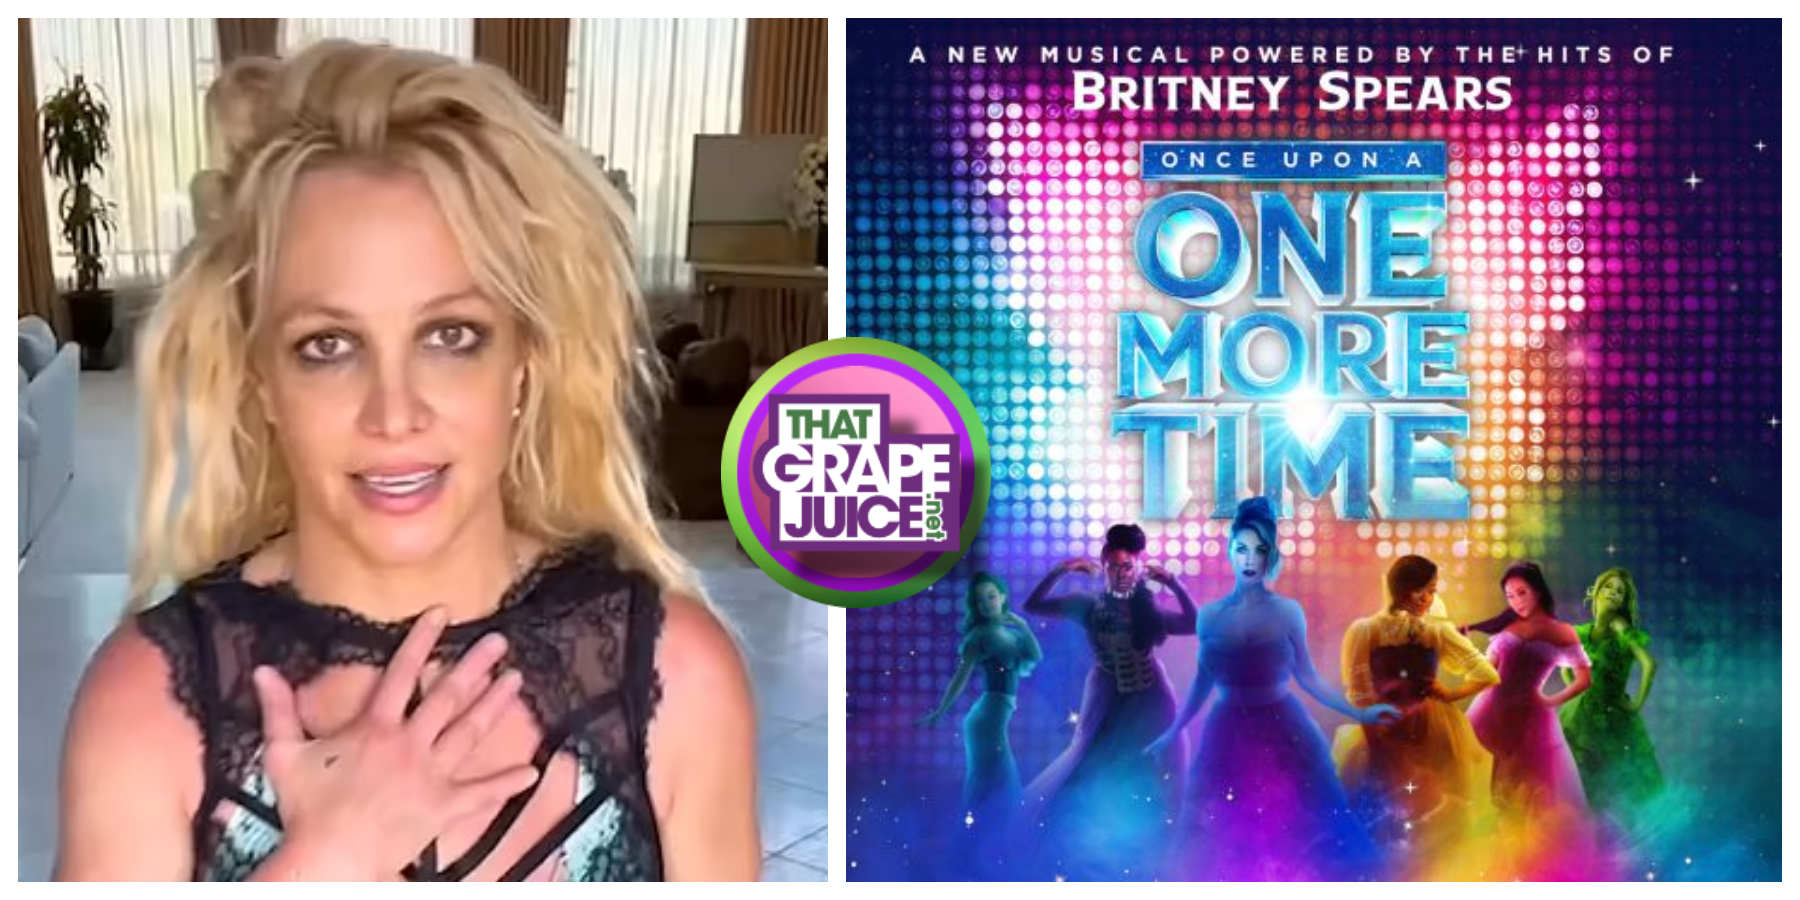 Britney Spears-Based Broadway Show to Close After Just 3 Months